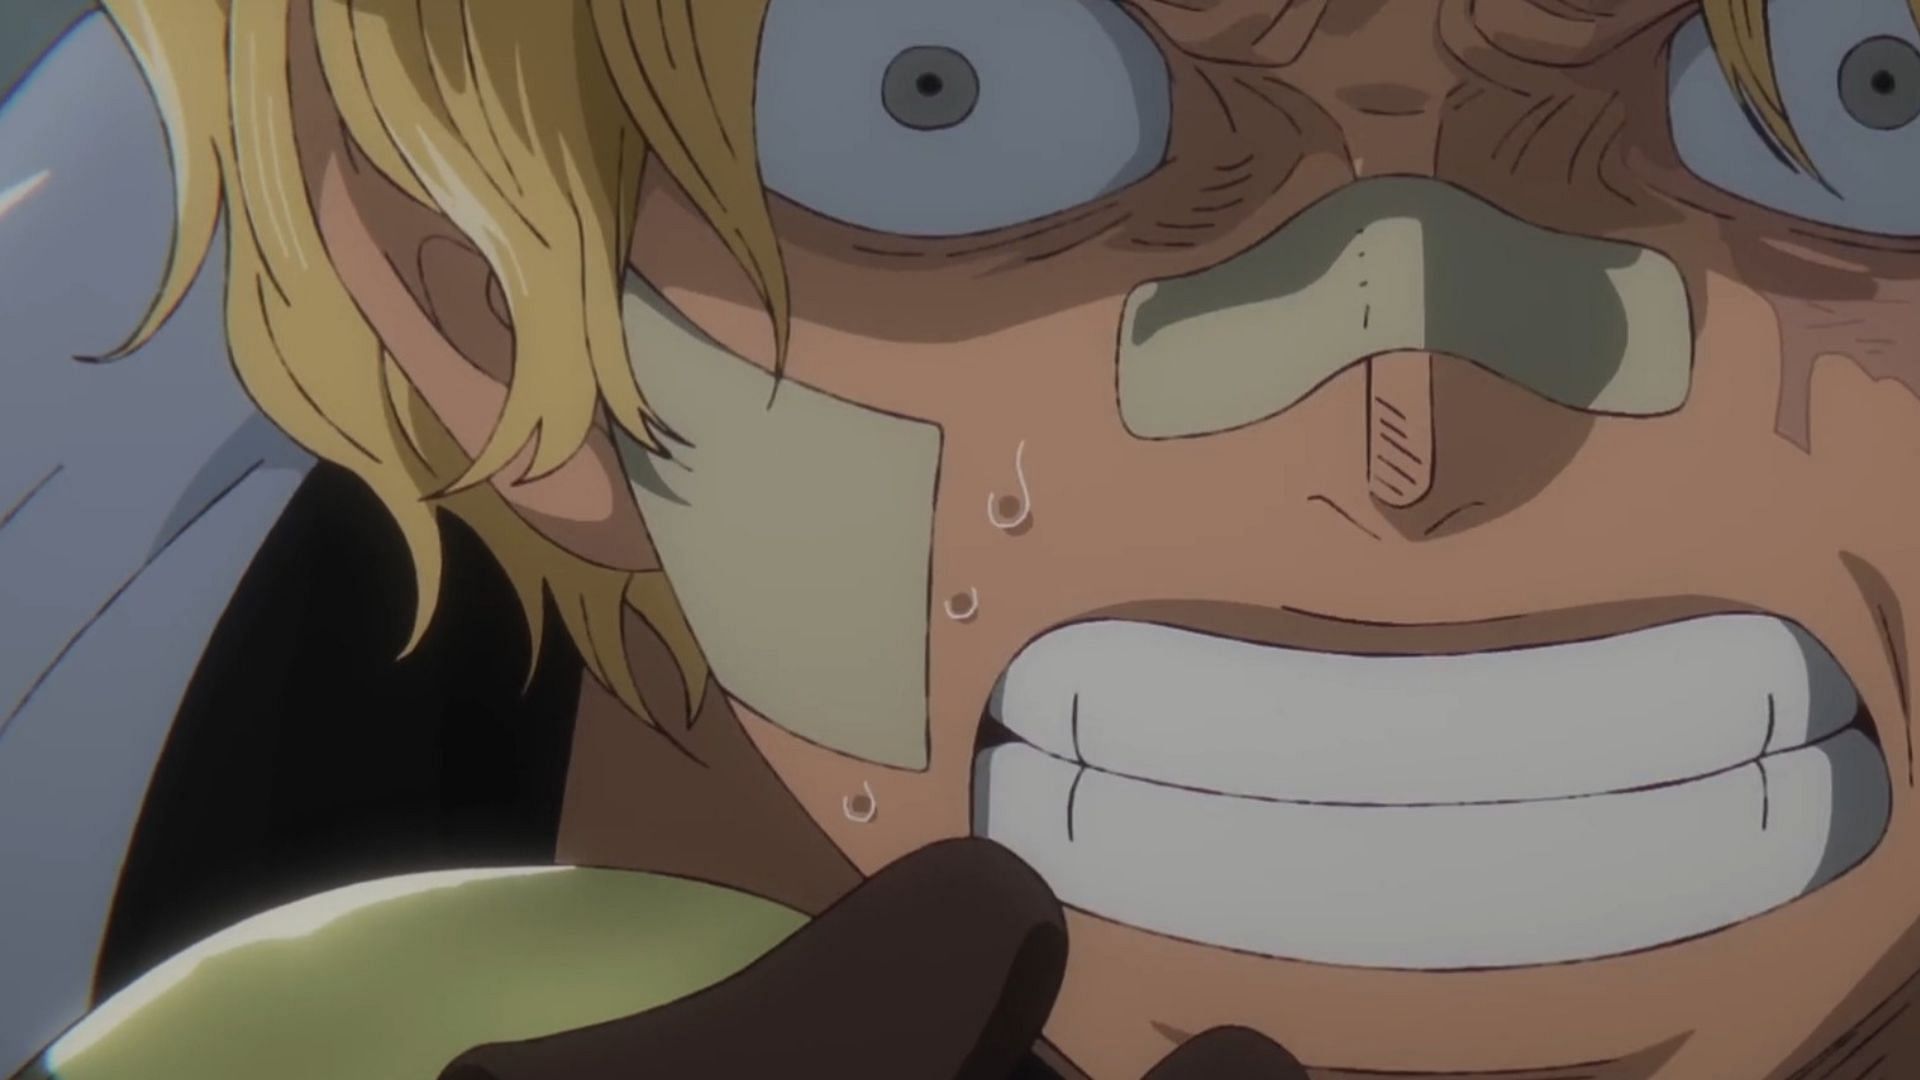 Sabo as seen in One Piece episode 1089 (Image via Toei Animation)